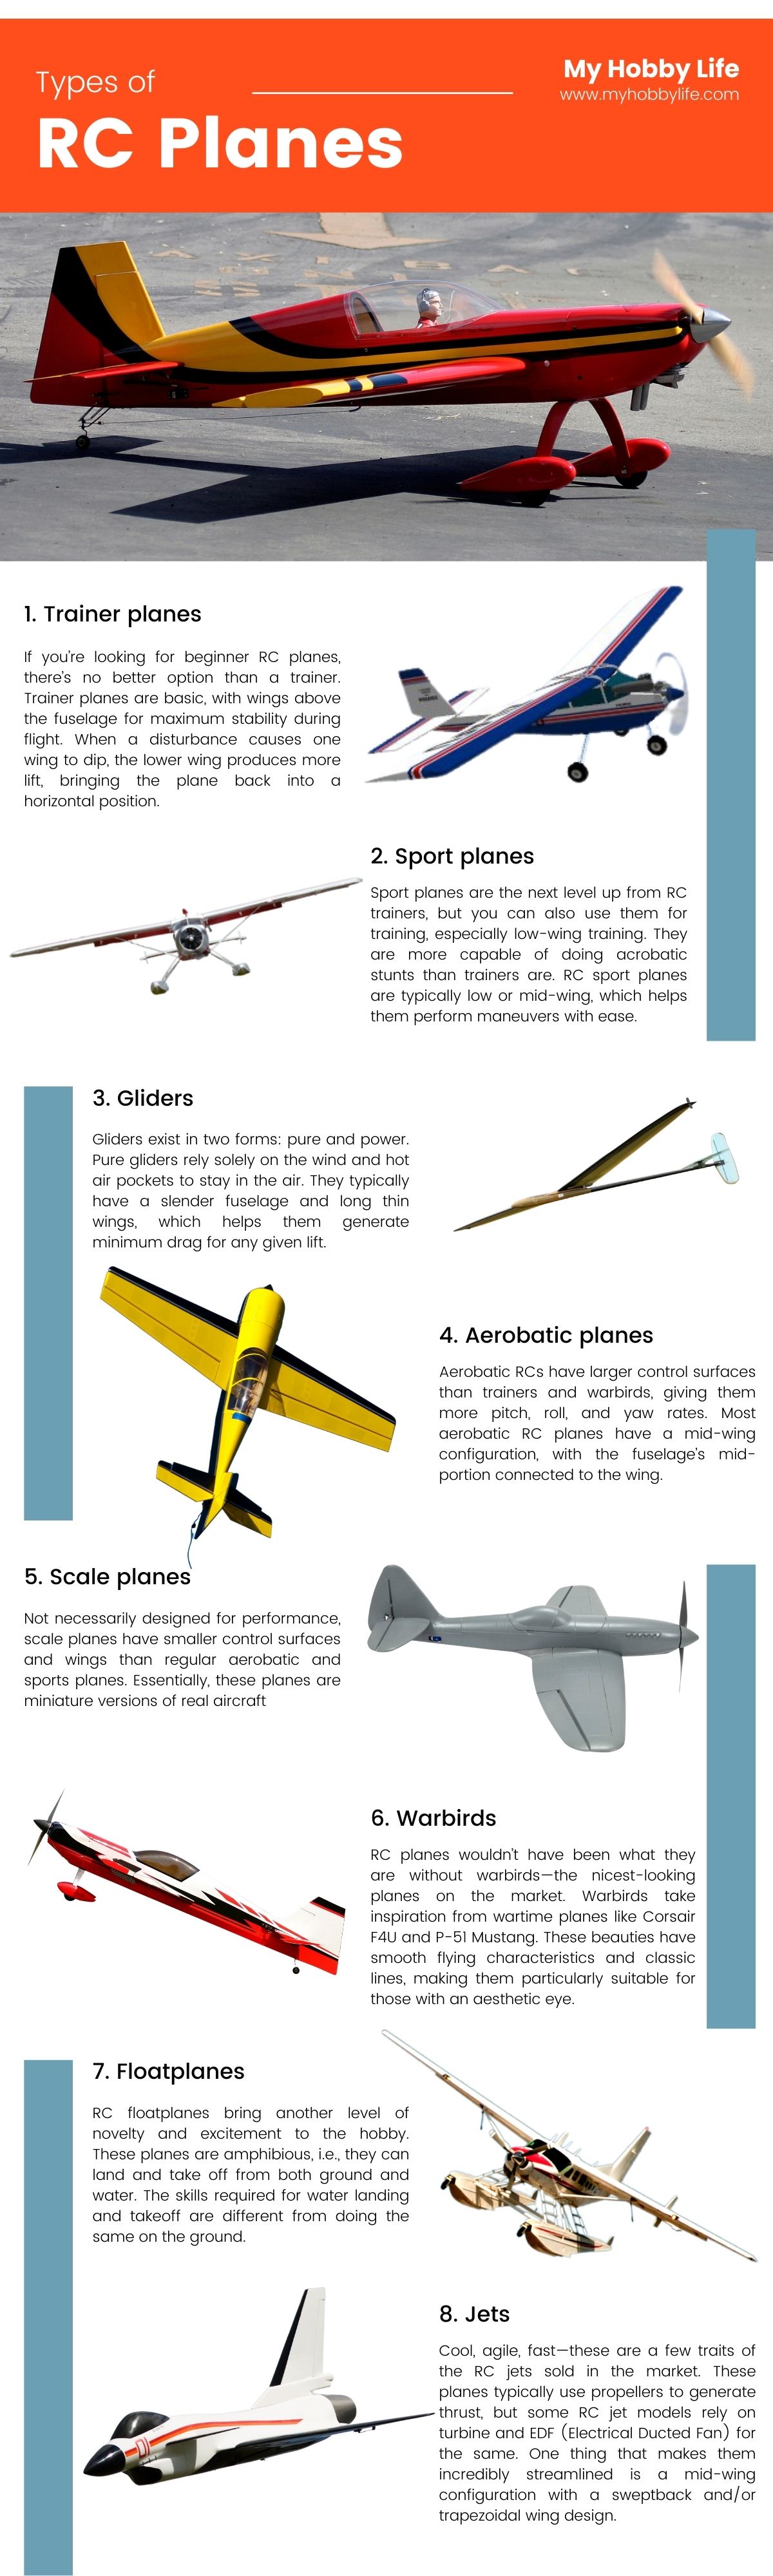 Types-of-RC-Planes